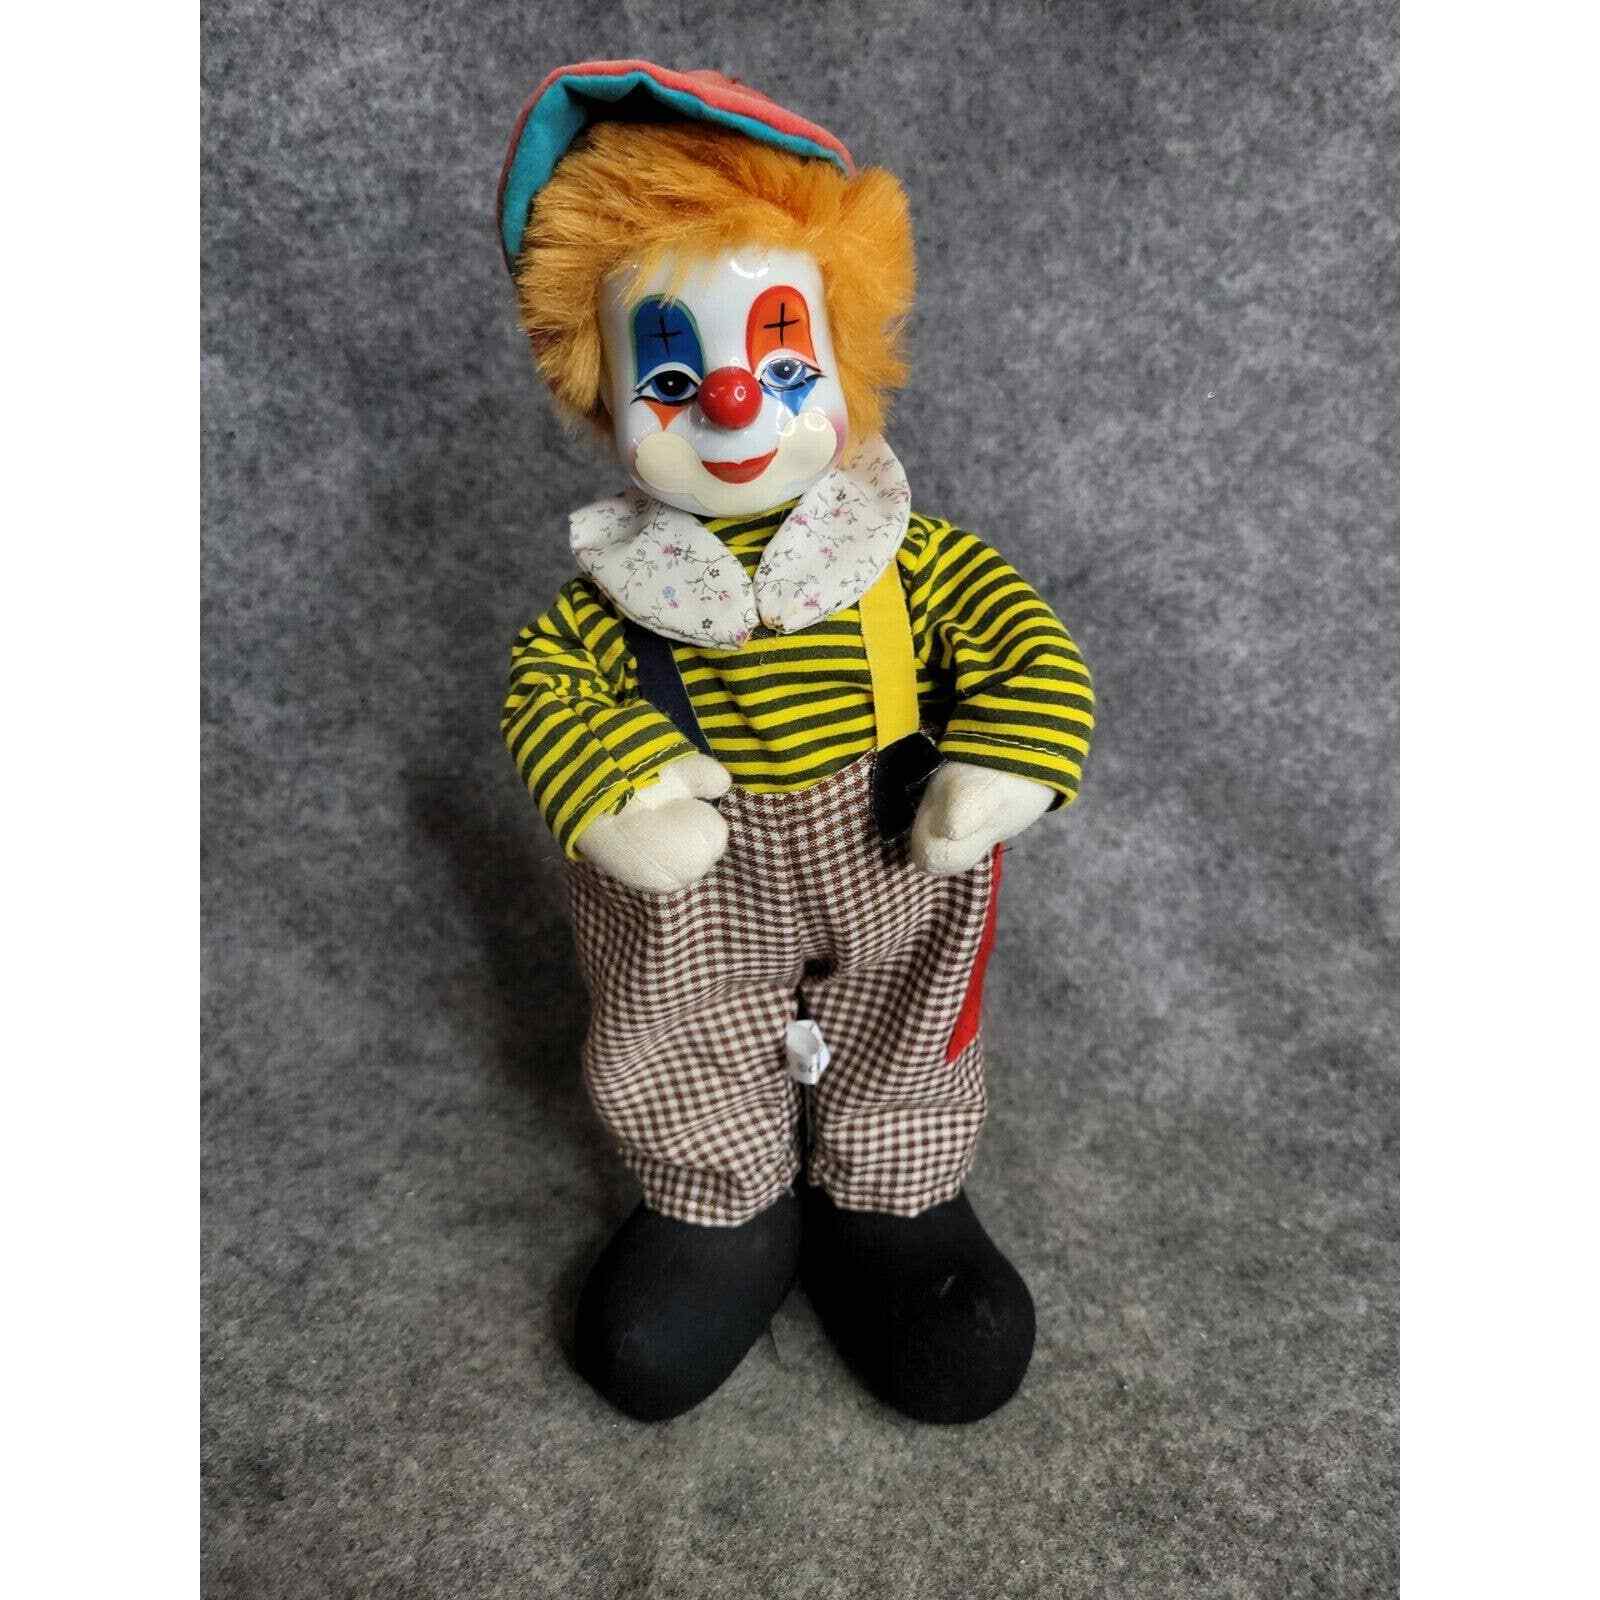 Vintage Circus Clown Stand Alone Porcelain Face Unmatched Clothing Figurine